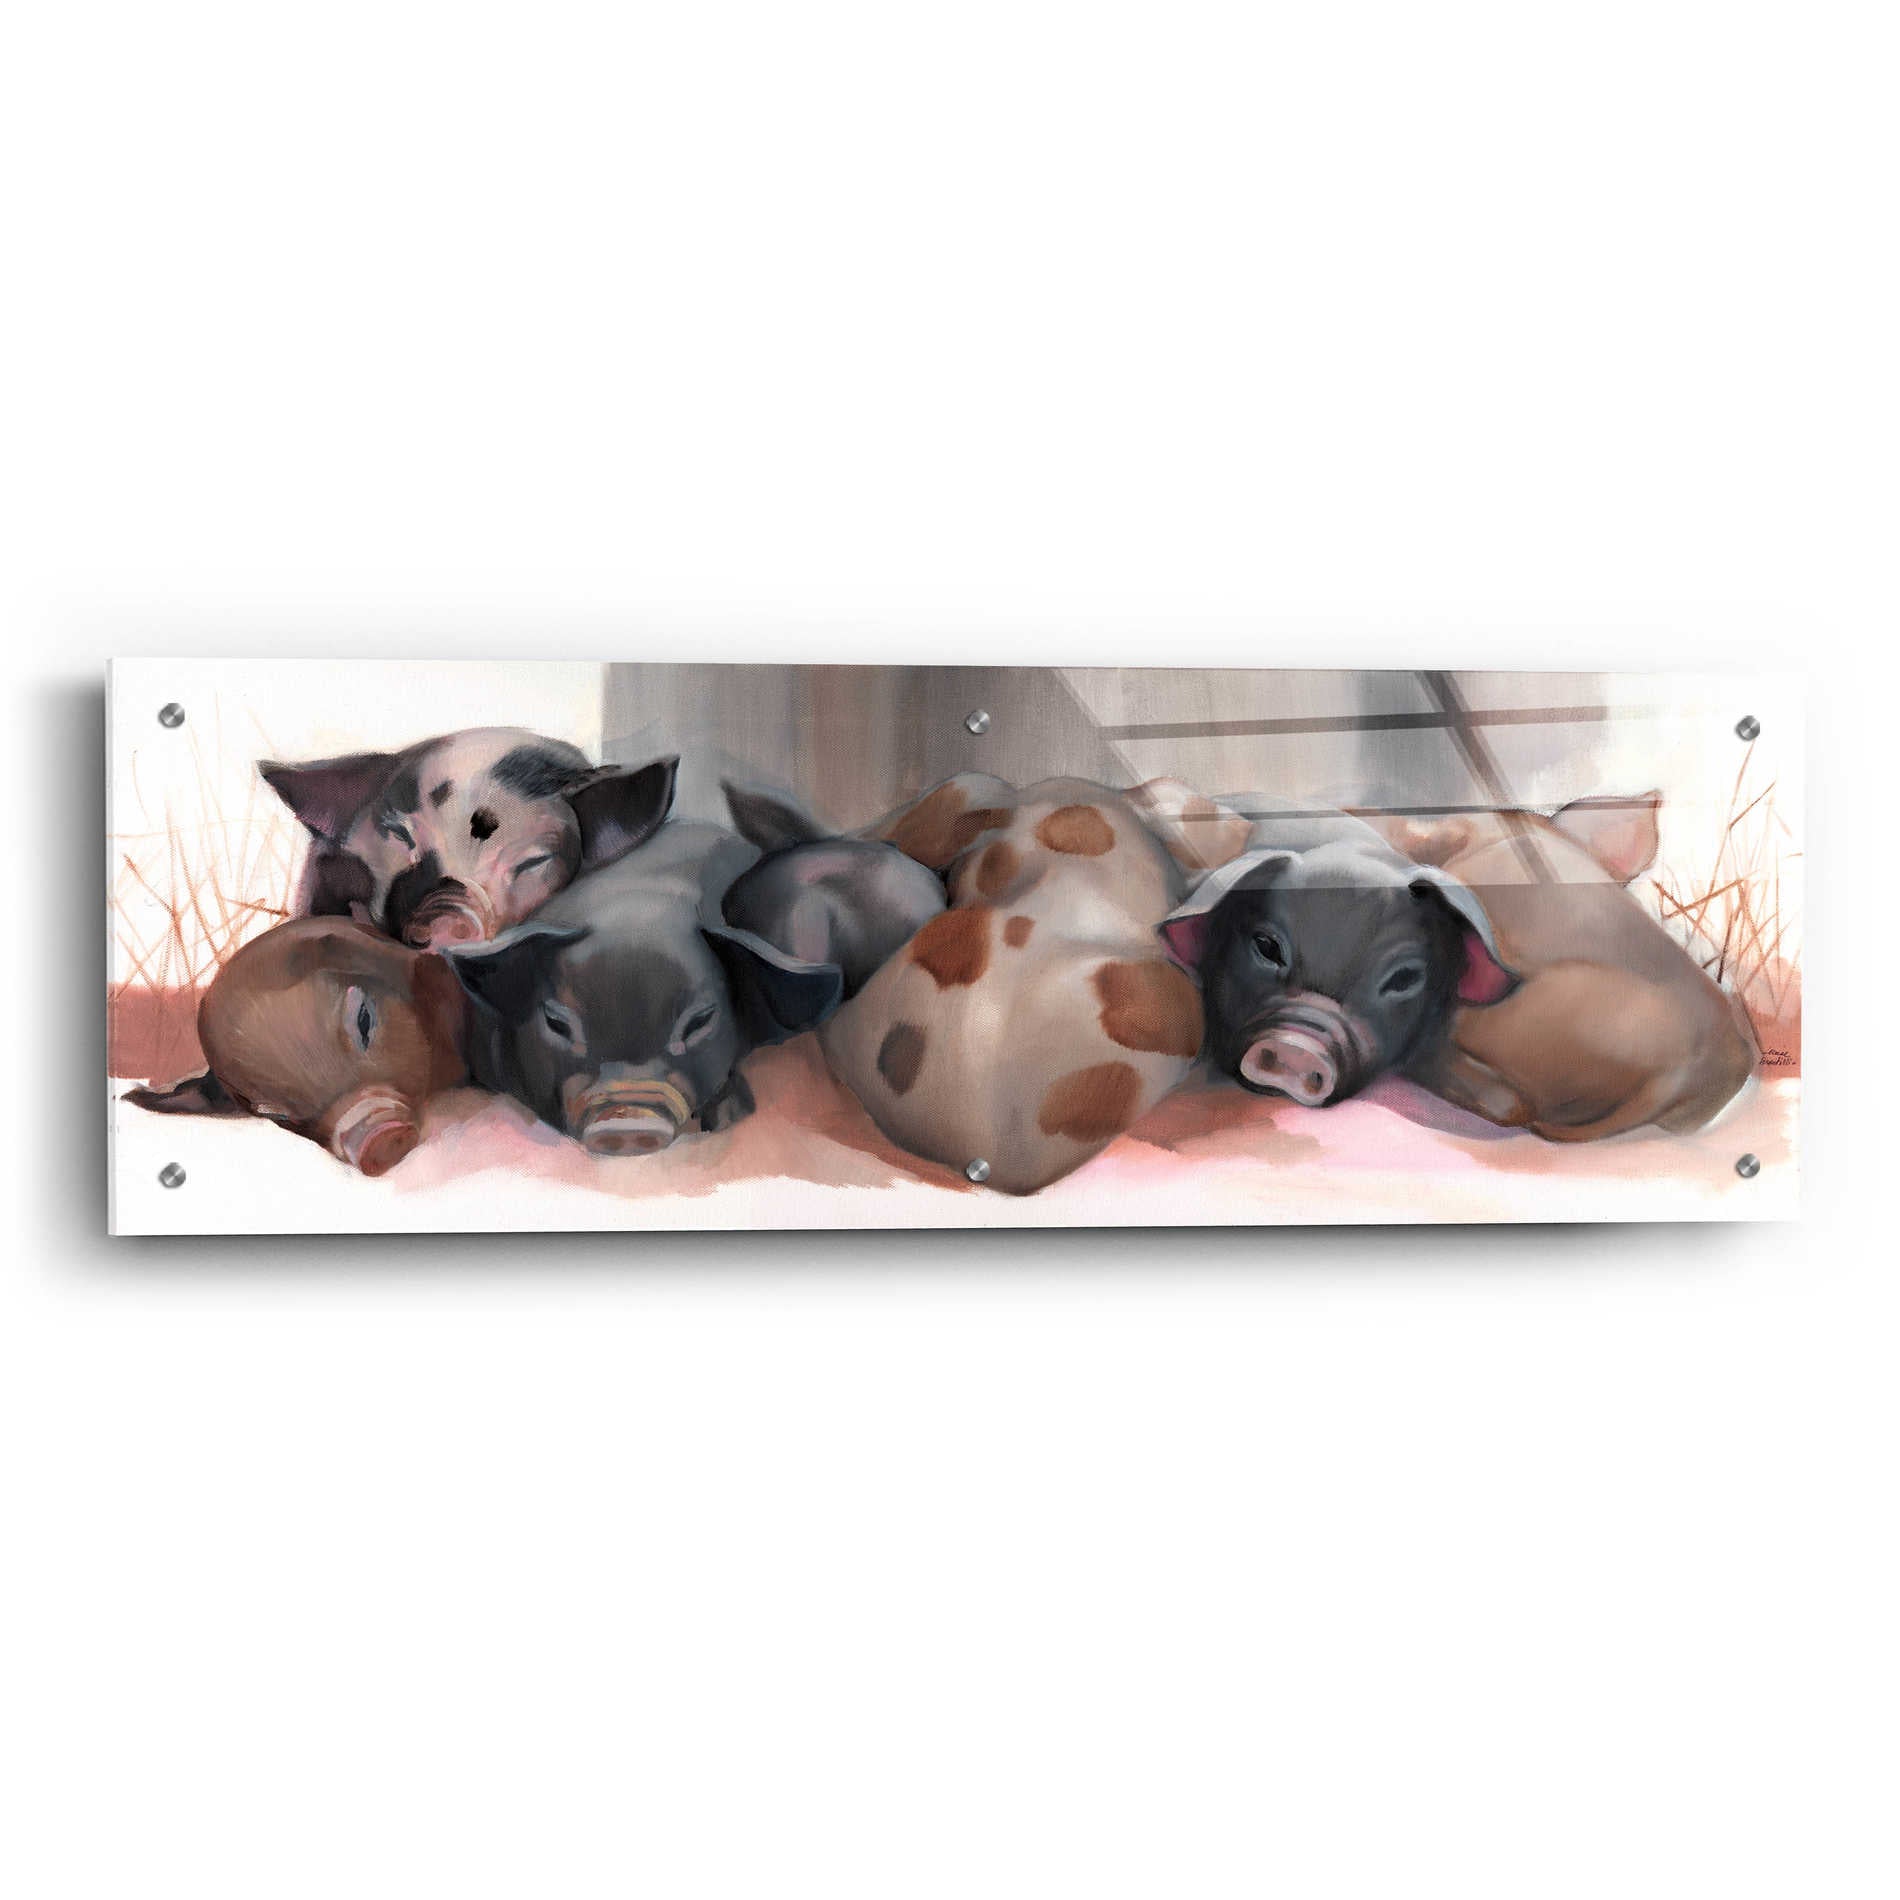 Epic Art 'Pig Pile' by Louise Montillio Acrylic Glass Wall Art,36x12